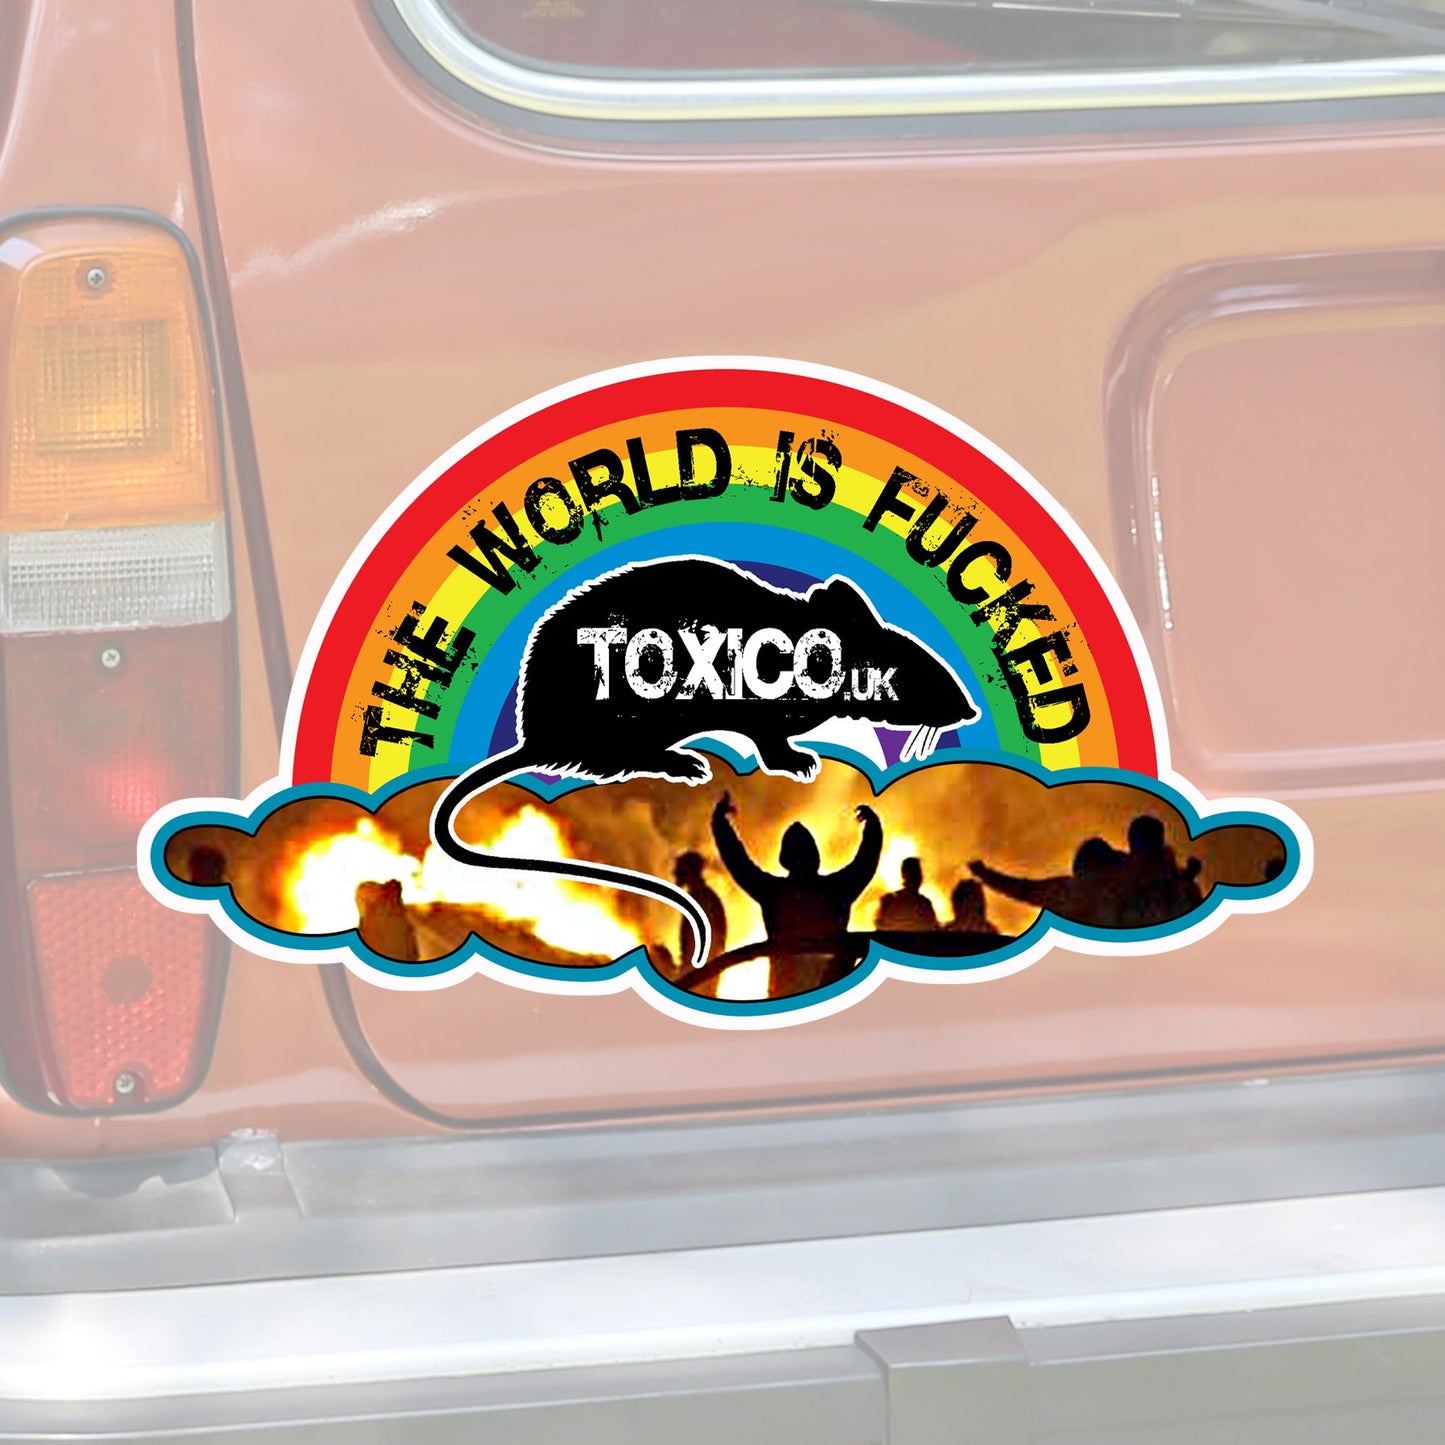 The World Is Fucked Sticker - Toxico Clothing